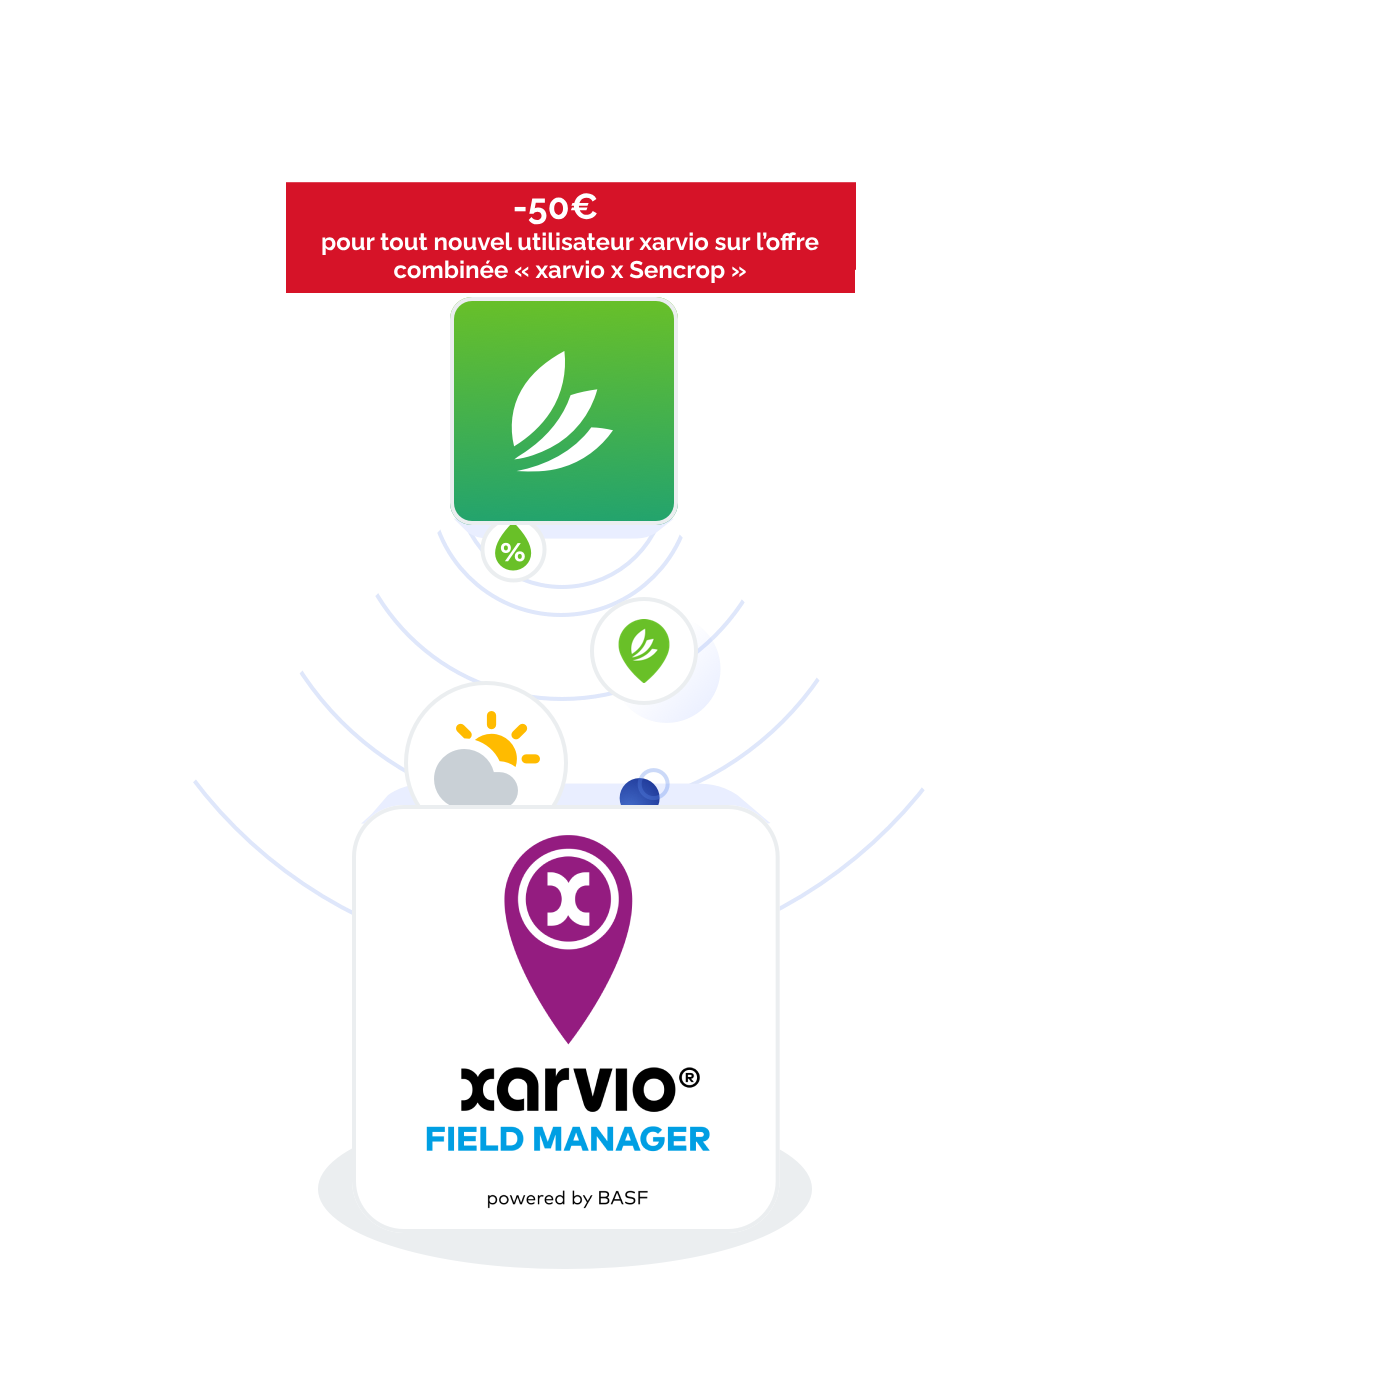 dst-partner-page-xarvio-offer